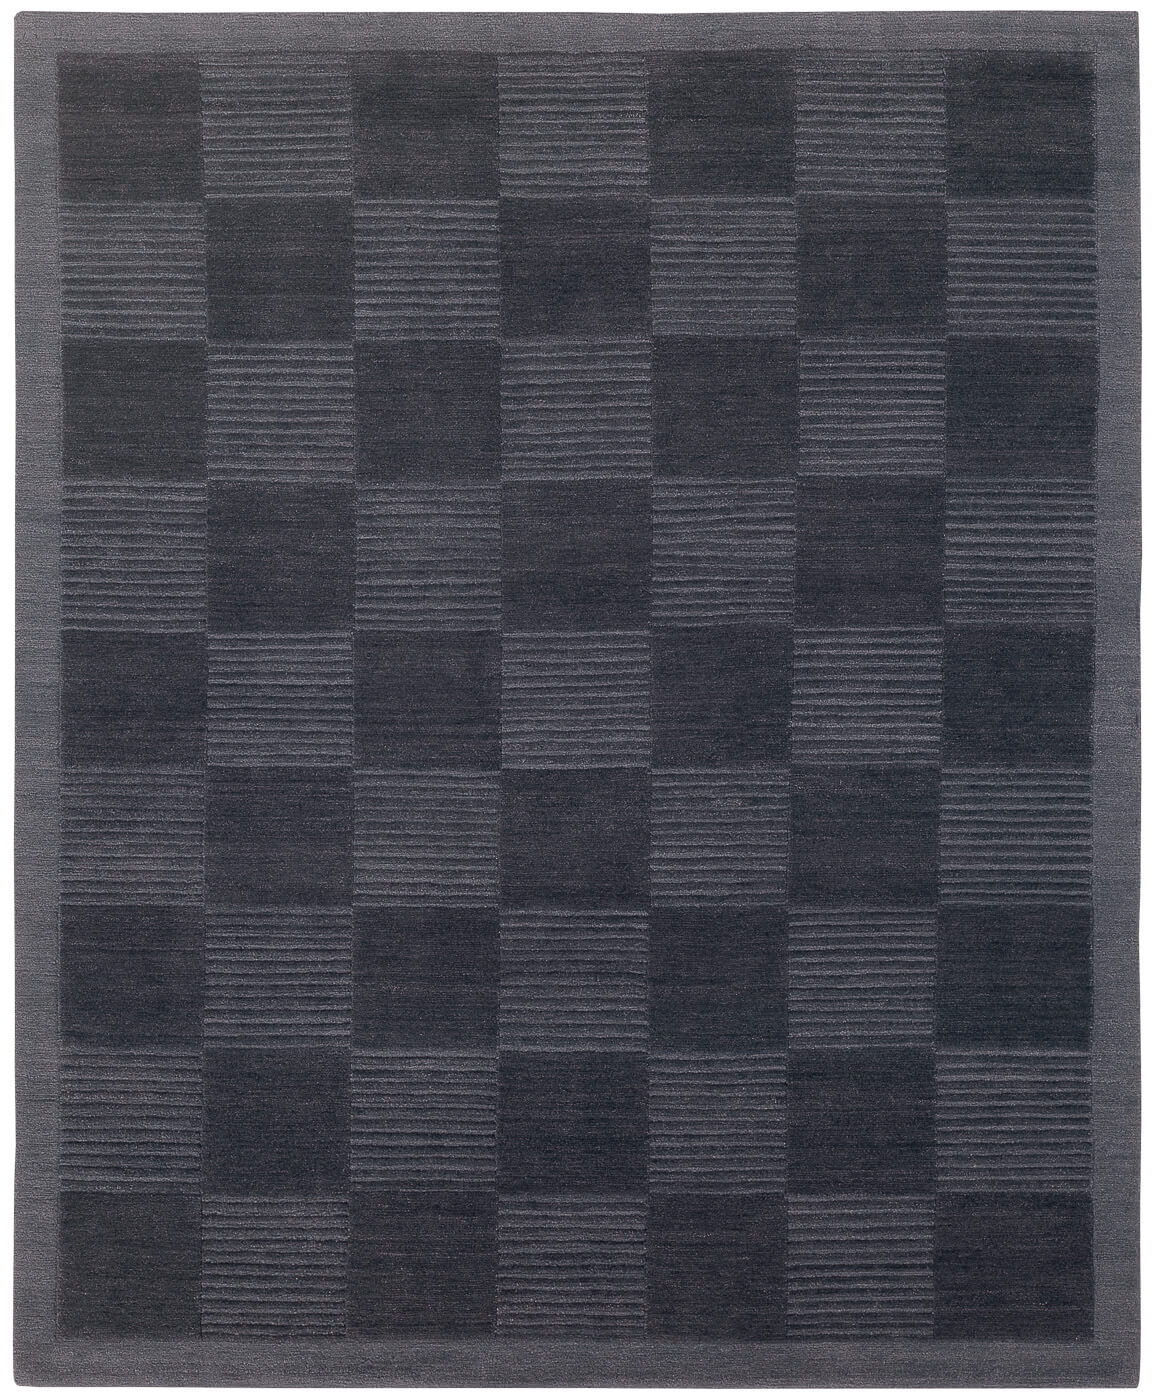 Boxes Hand-woven Luxury Rug ☞ Size: 250 x 300 cm